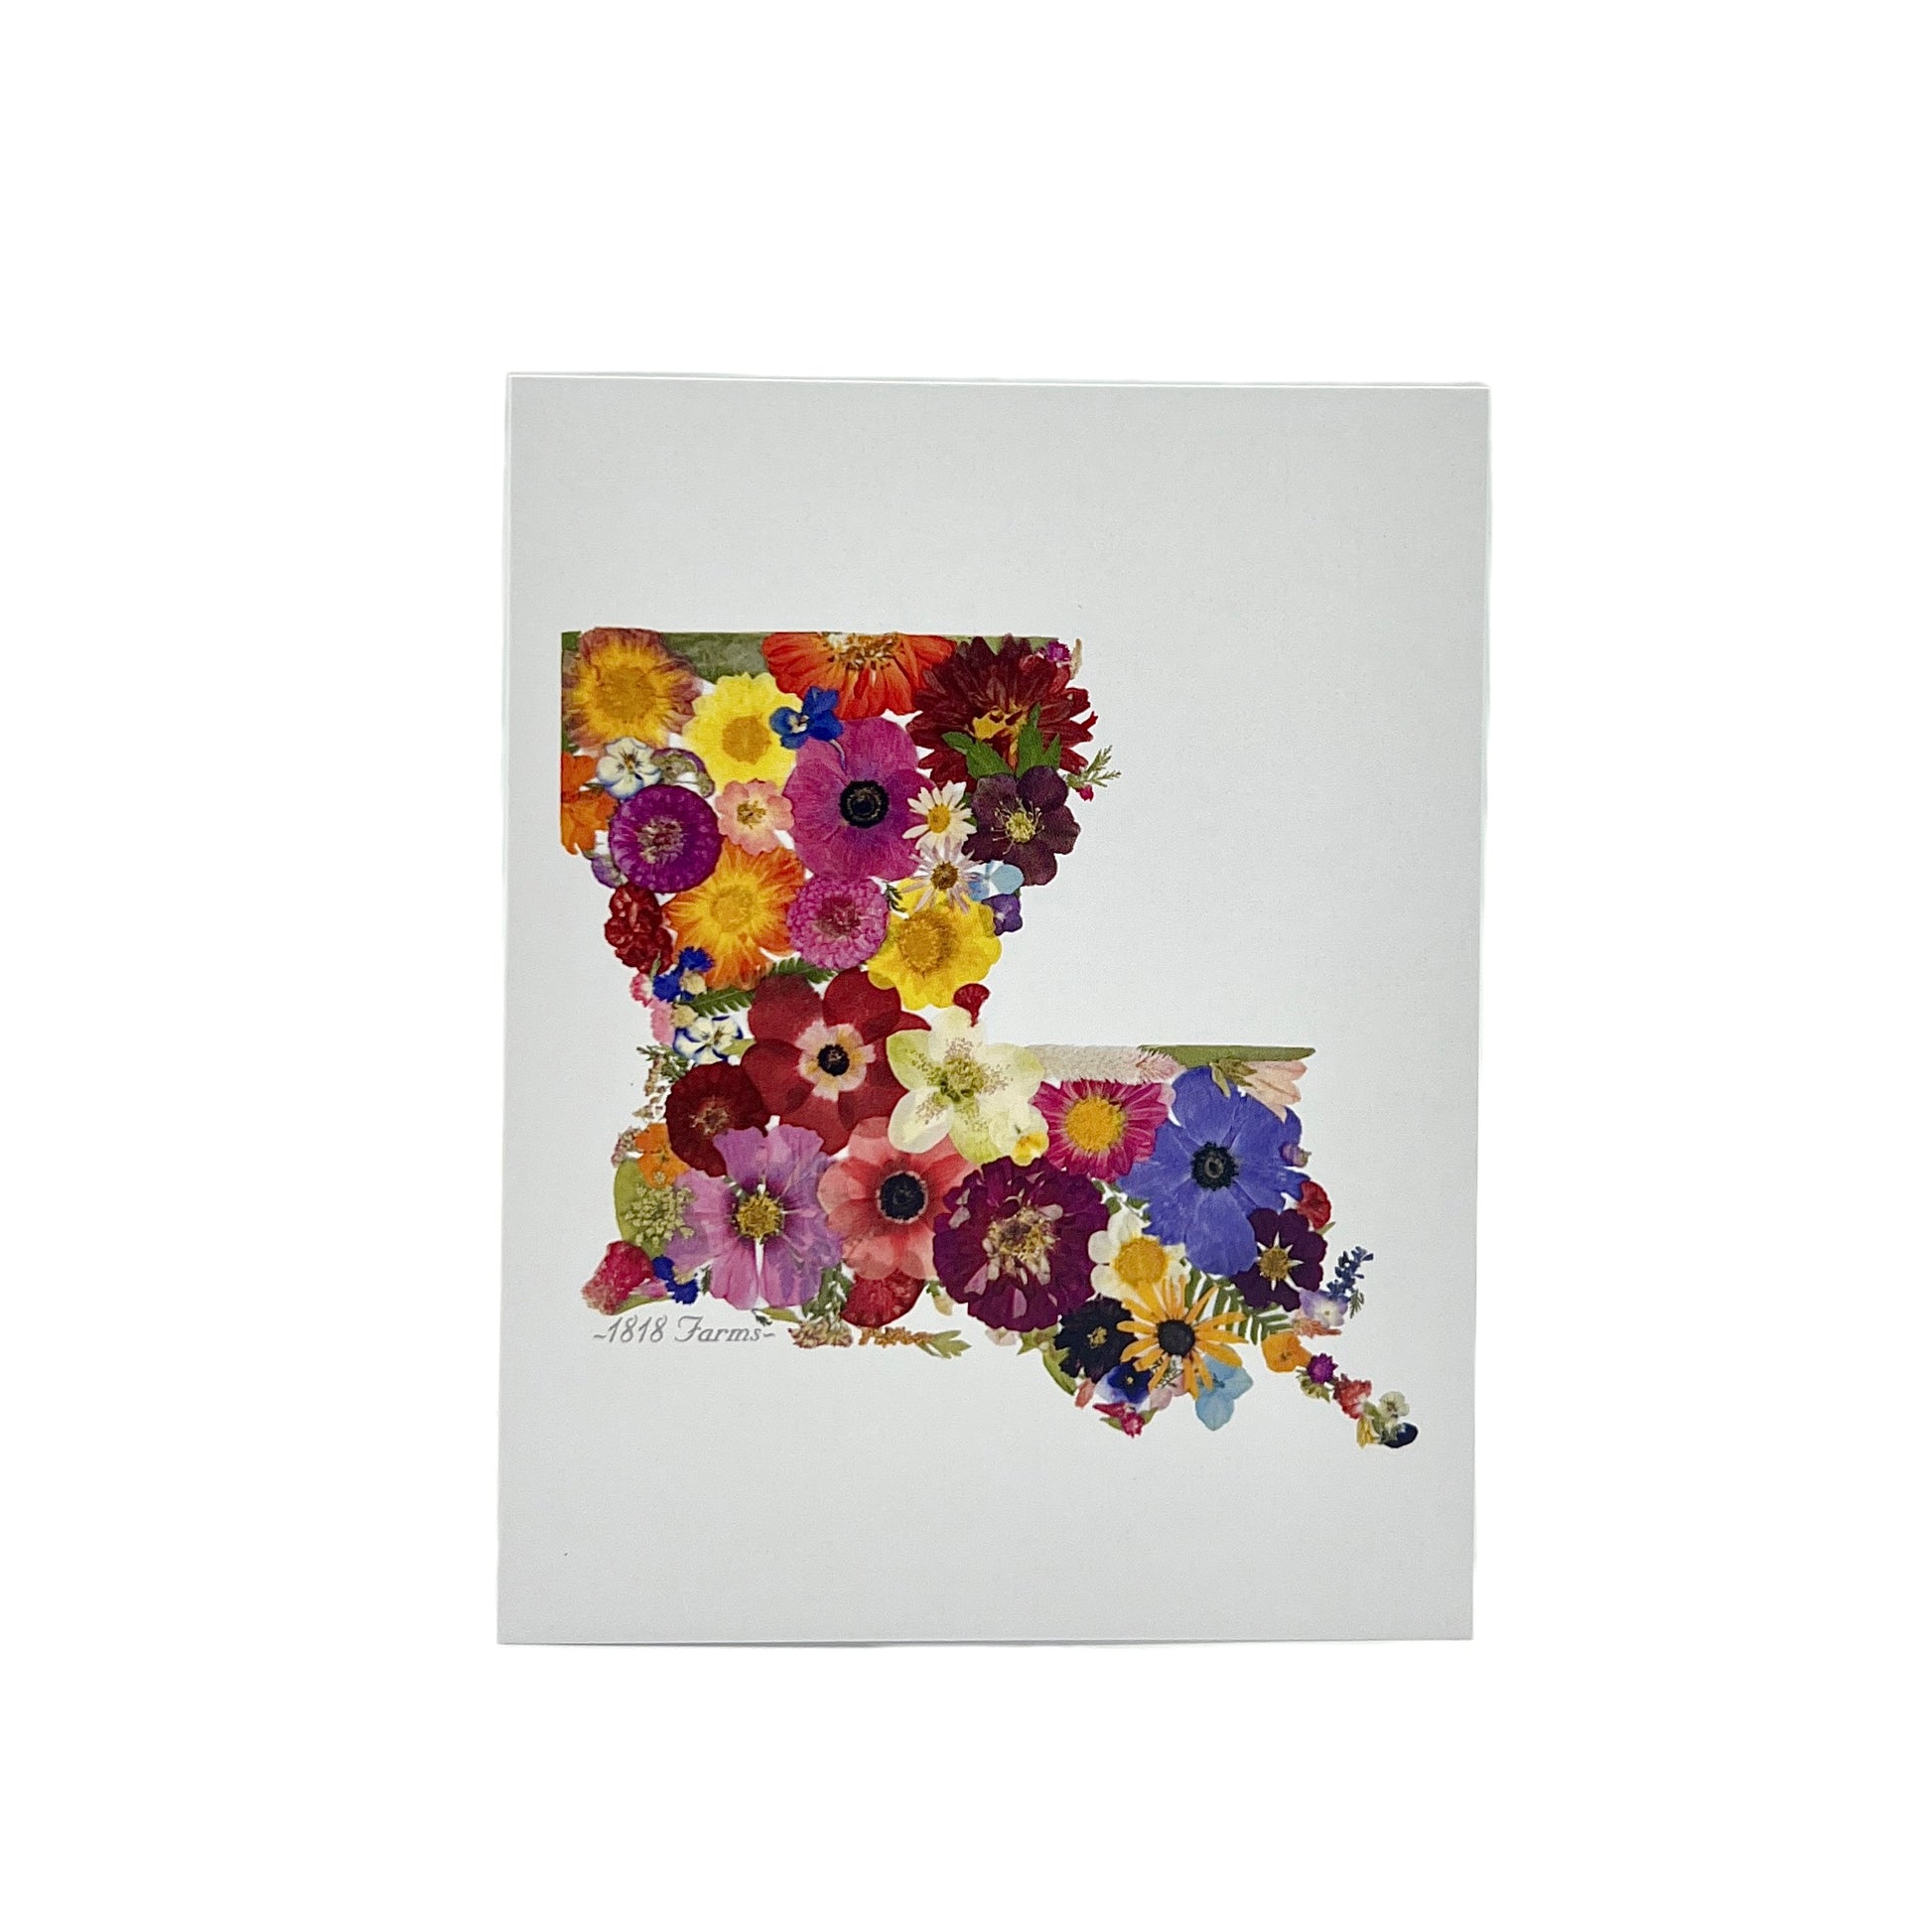 State Themed Notecards (Set of 6) Featuring Dried, Pressed Flowers - "Where I Bloom" Collection Notecard 1818 Farms Louisiana  